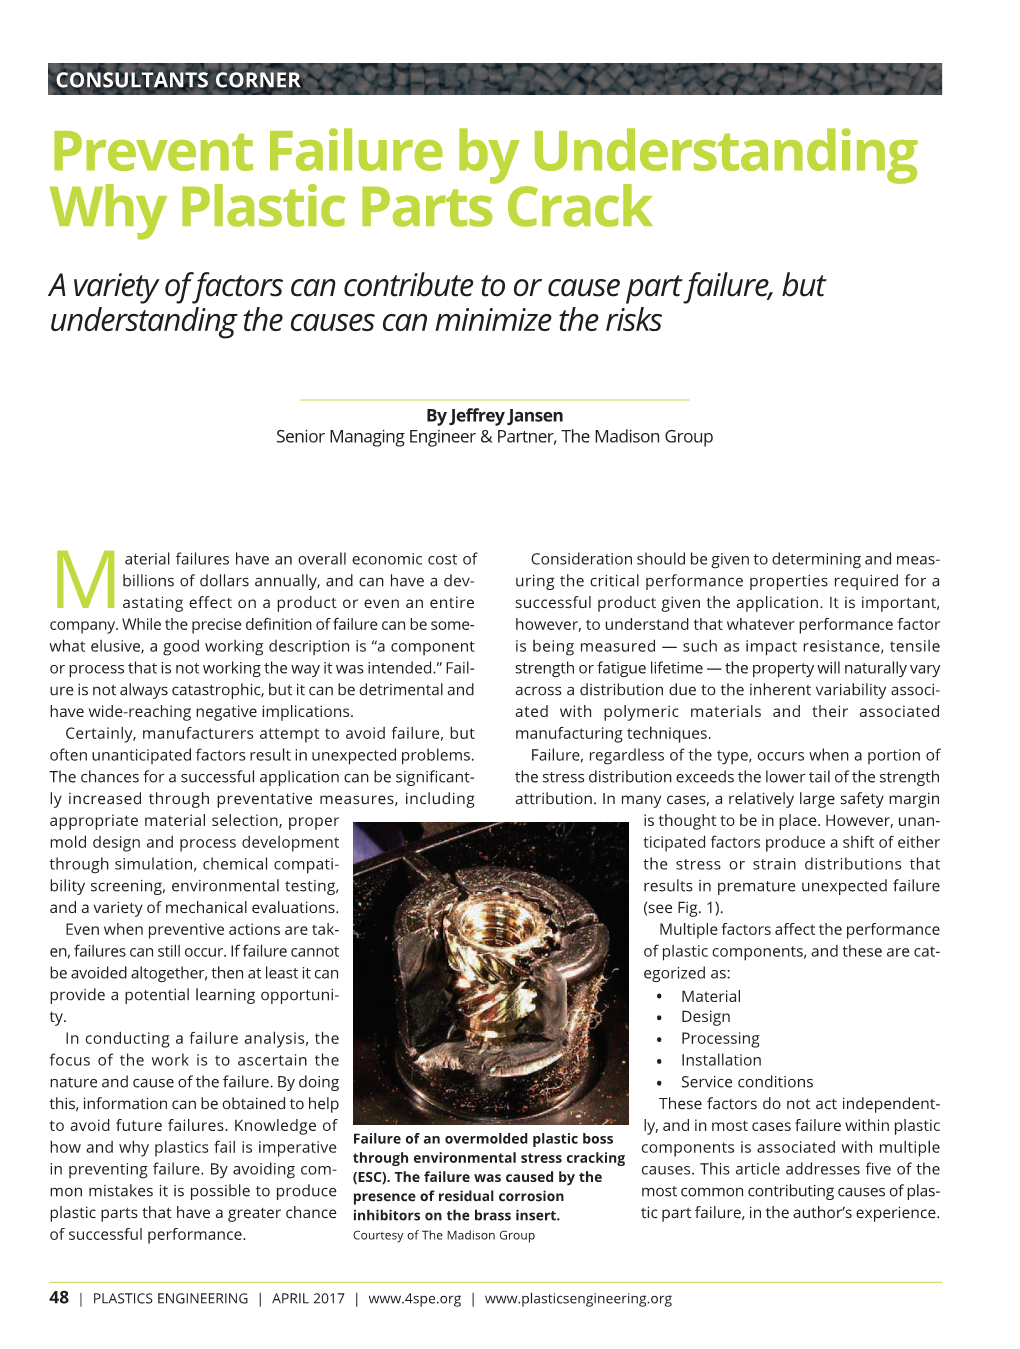 Prevent Failure by Understanding Why Plastic Parts Crack